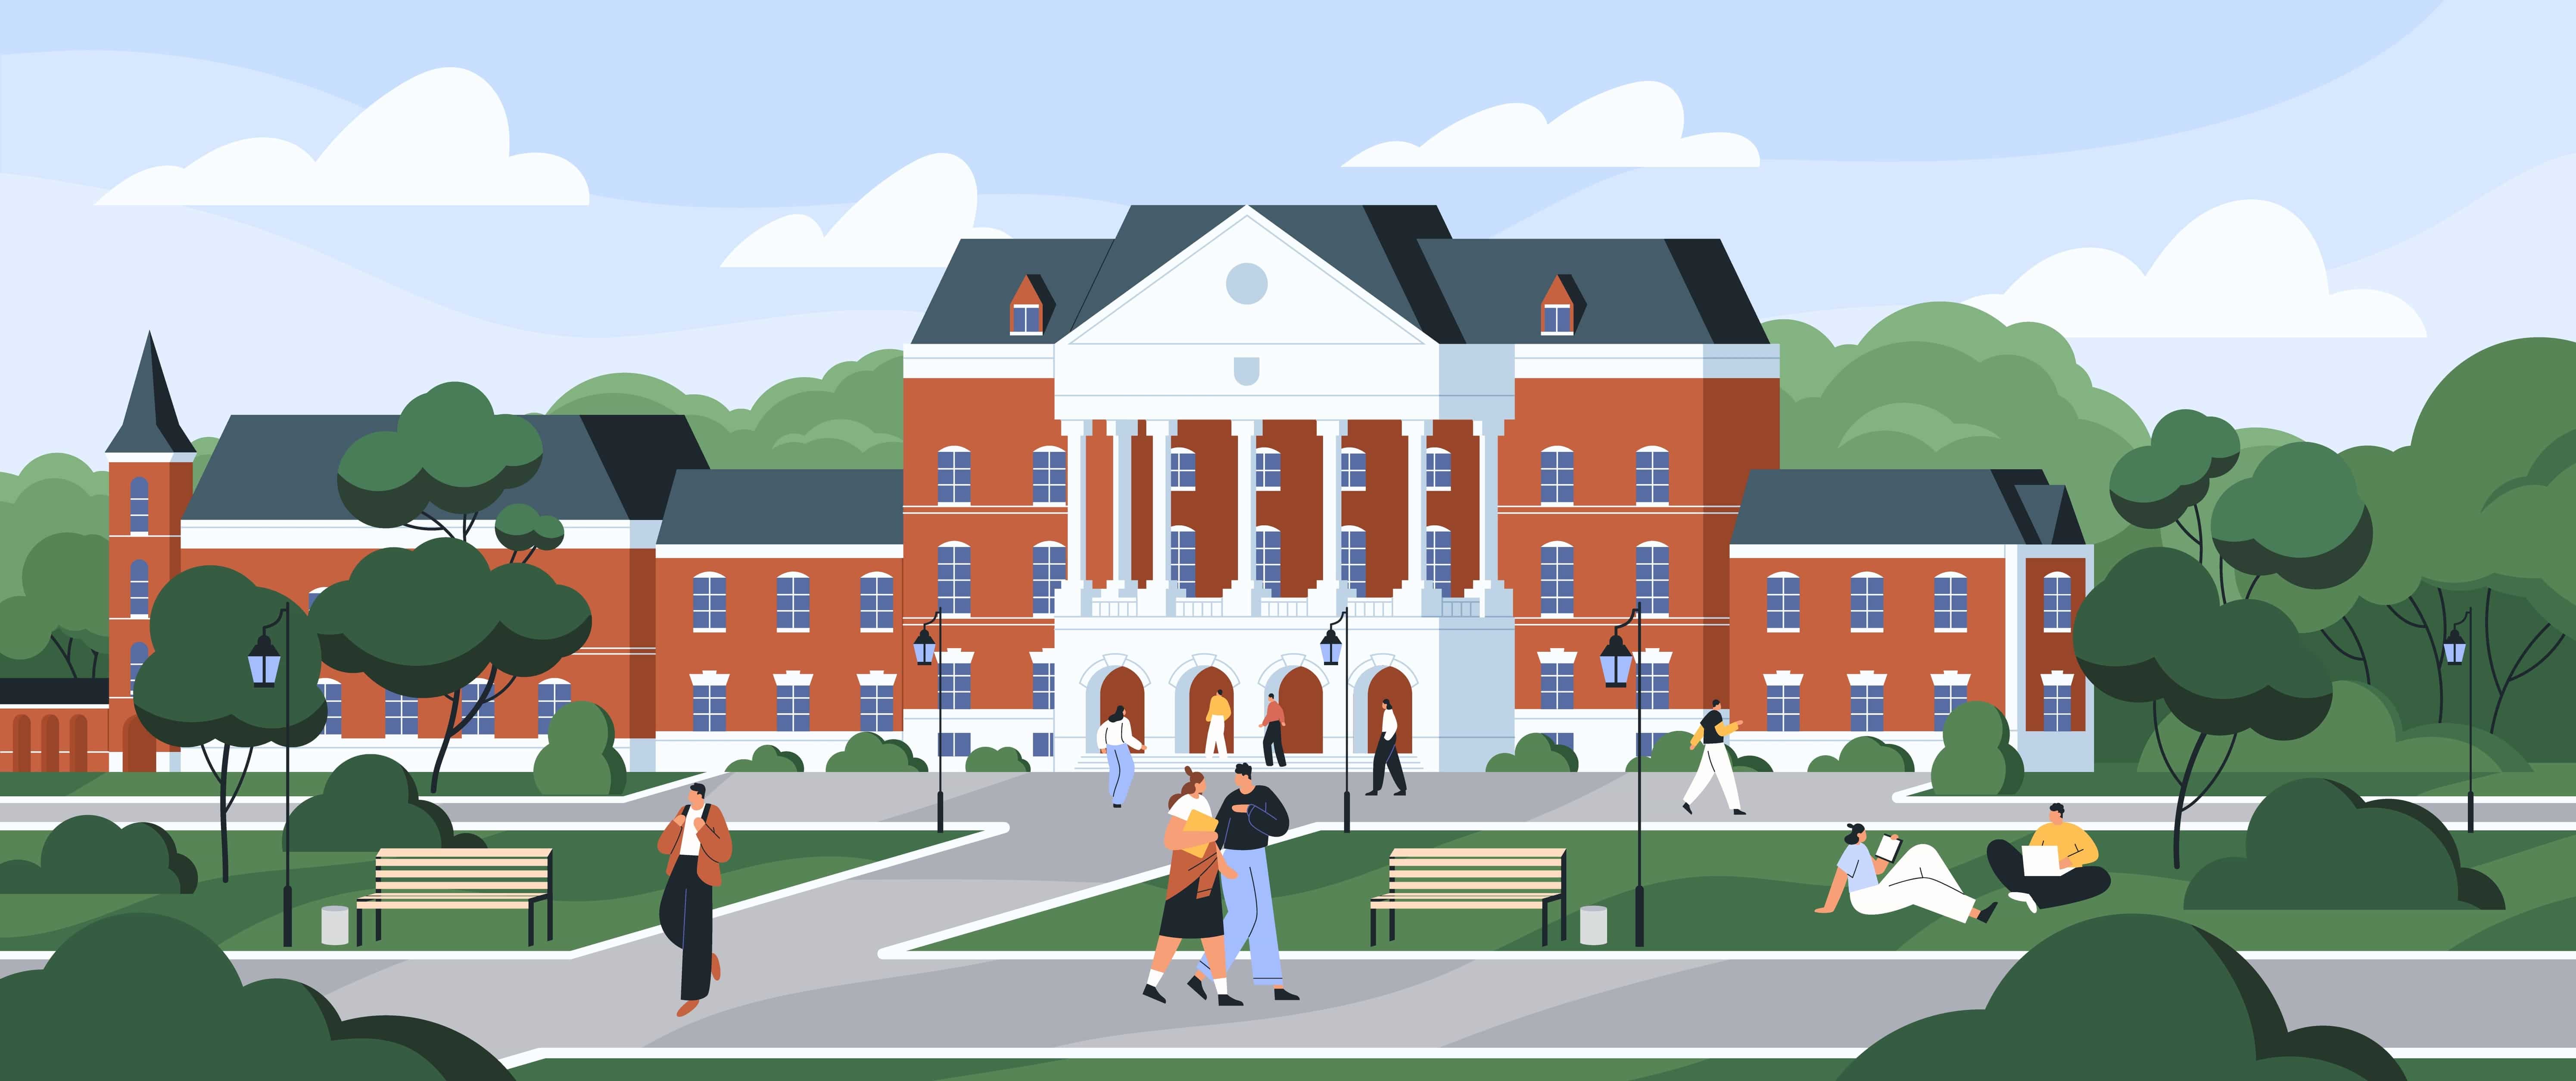 A flat illustration of a college campus with enrollment managers walking around.